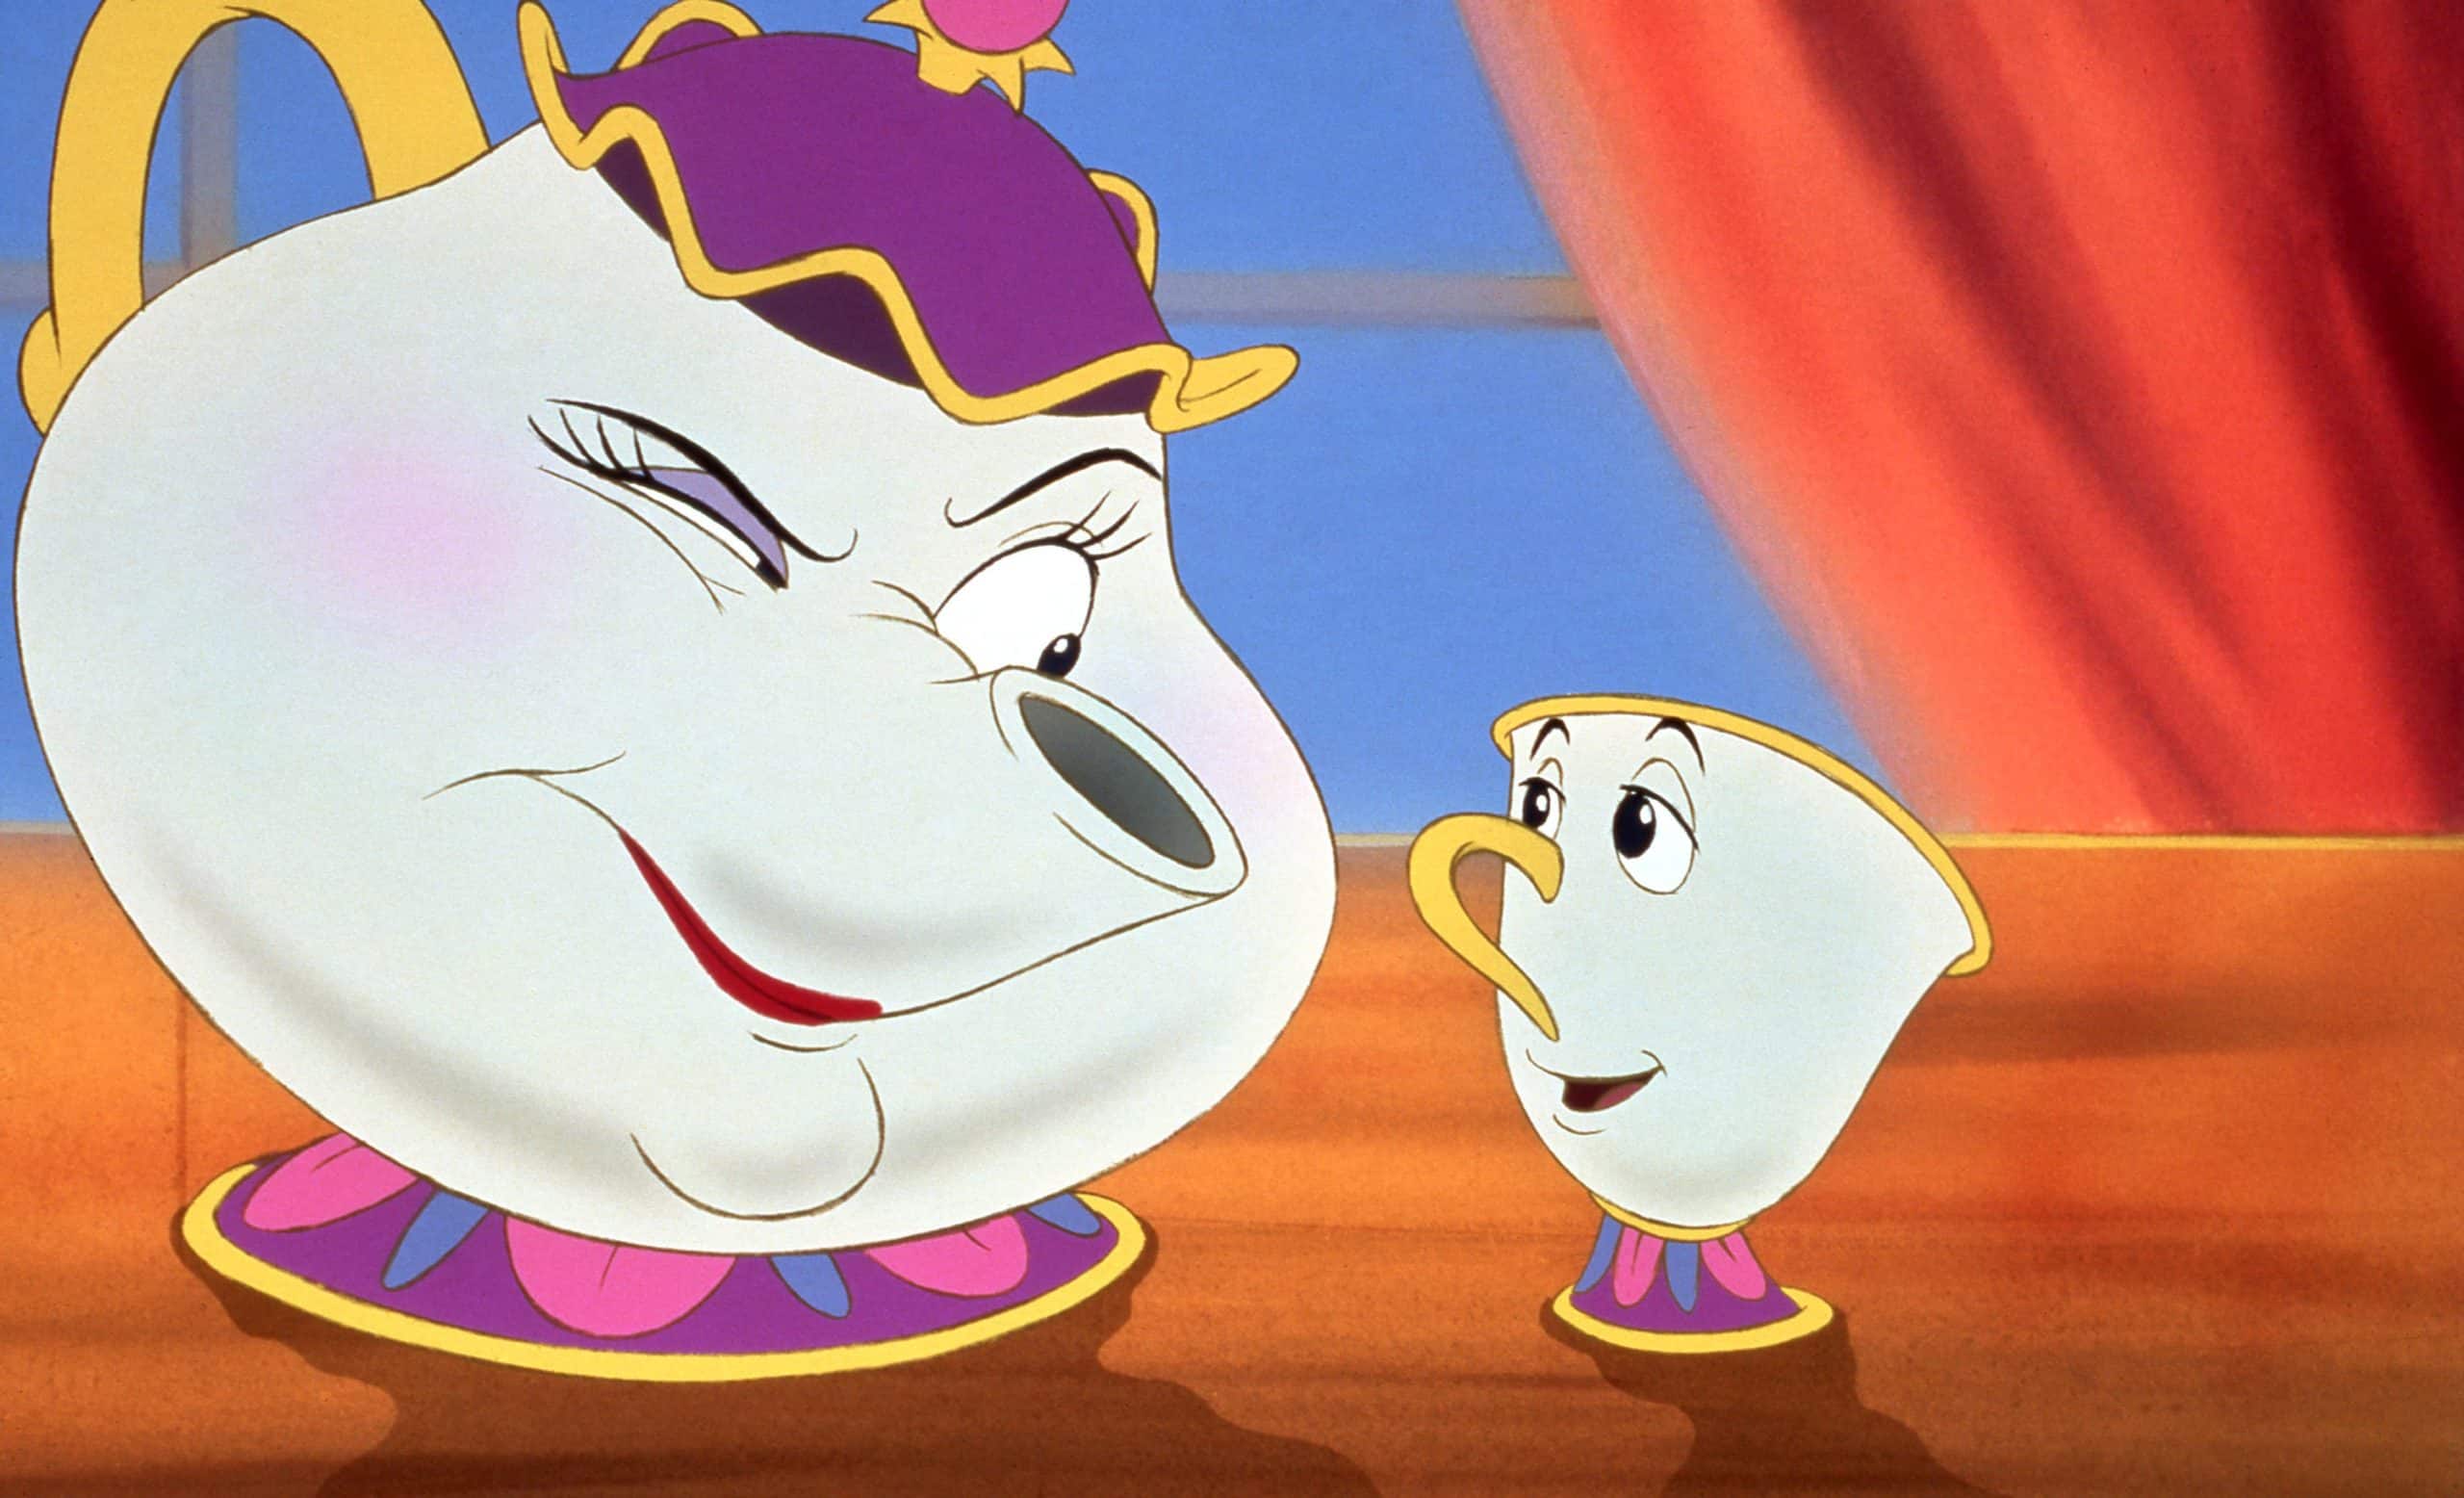 BEAUTY AND THE BEAST, BEAUTY AND THE BEAST, from left: Mrs. Potts (voice: Angela Lansbury), Chip (voice: Bradley Michael Pierce), 1991